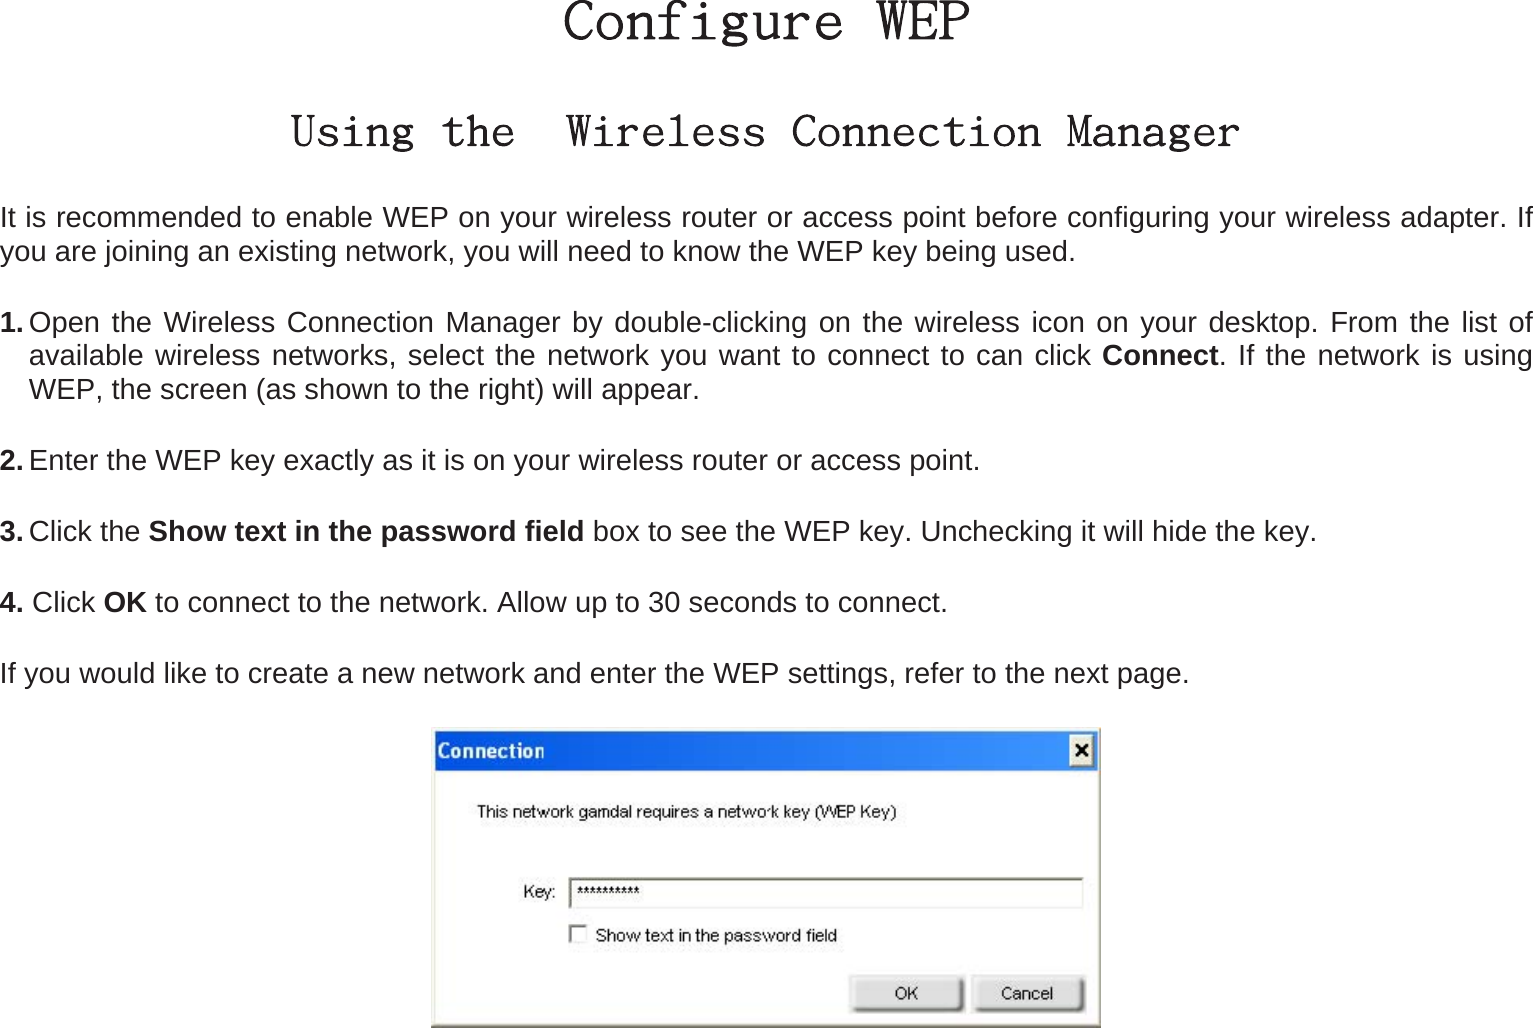 Configure WEP Using the  Wireless Connection Manager It is recommended to enable WEP on your wireless router or access point before configuring your wireless adapter. If you are joining an existing network, you will need to know the WEP key being used. 1. Open the Wireless Connection Manager by double-clicking on the wireless icon on your desktop. From the list of available wireless networks, select the network you want to connect to can click Connect. If the network is using WEP, the screen (as shown to the right) will appear.   2. Enter the WEP key exactly as it is on your wireless router or access point. 3. Click the Show text in the password field box to see the WEP key. Unchecking it will hide the key. 4. Click OK to connect to the network. Allow up to 30 seconds to connect.   If you would like to create a new network and enter the WEP settings, refer to the next page.  